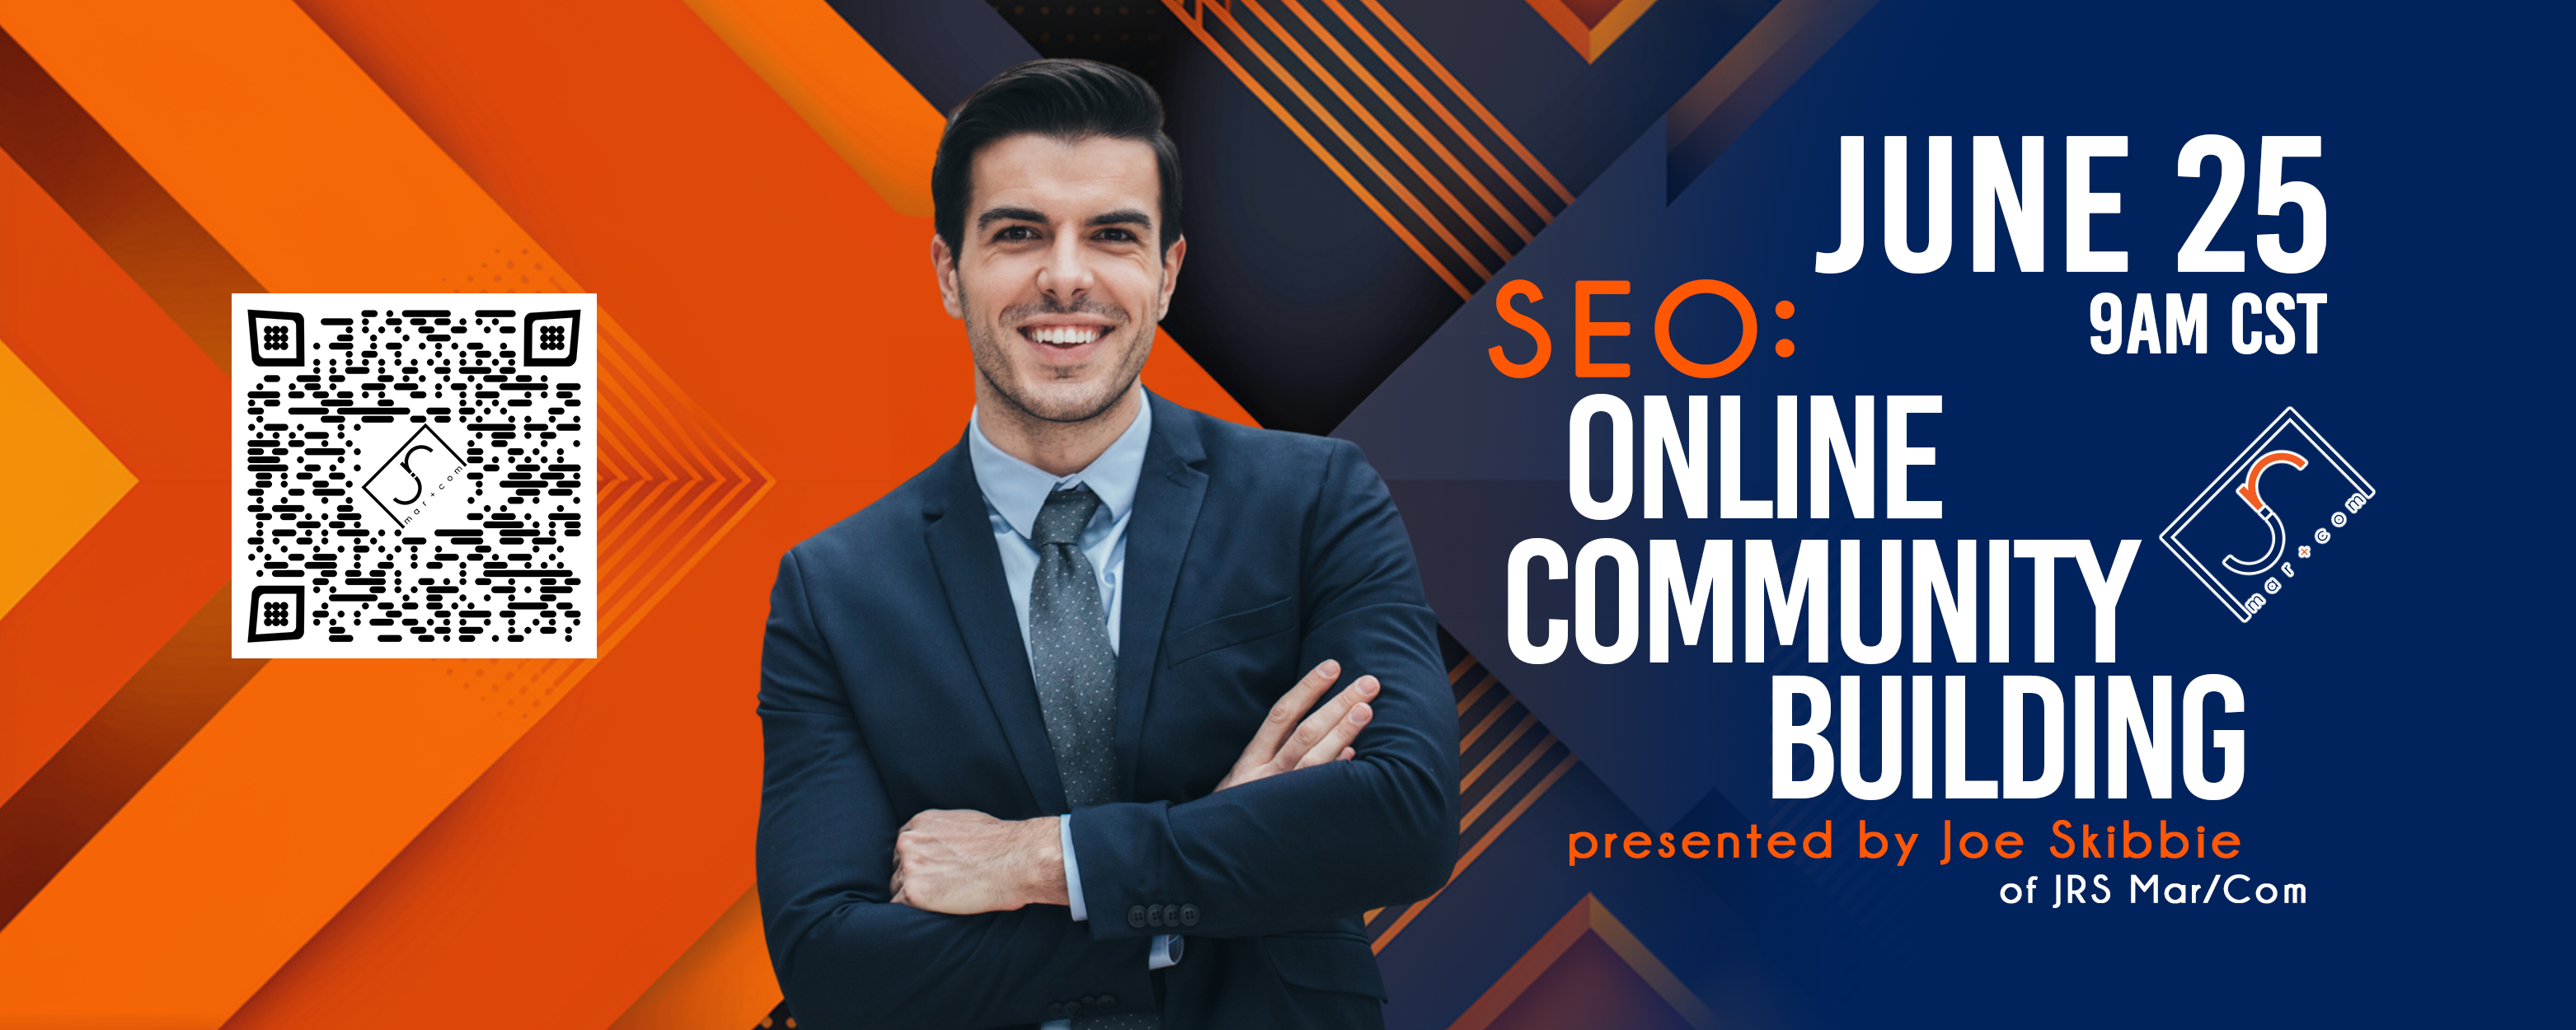 seo webinar for business owners - free online event june 25 9am CAST